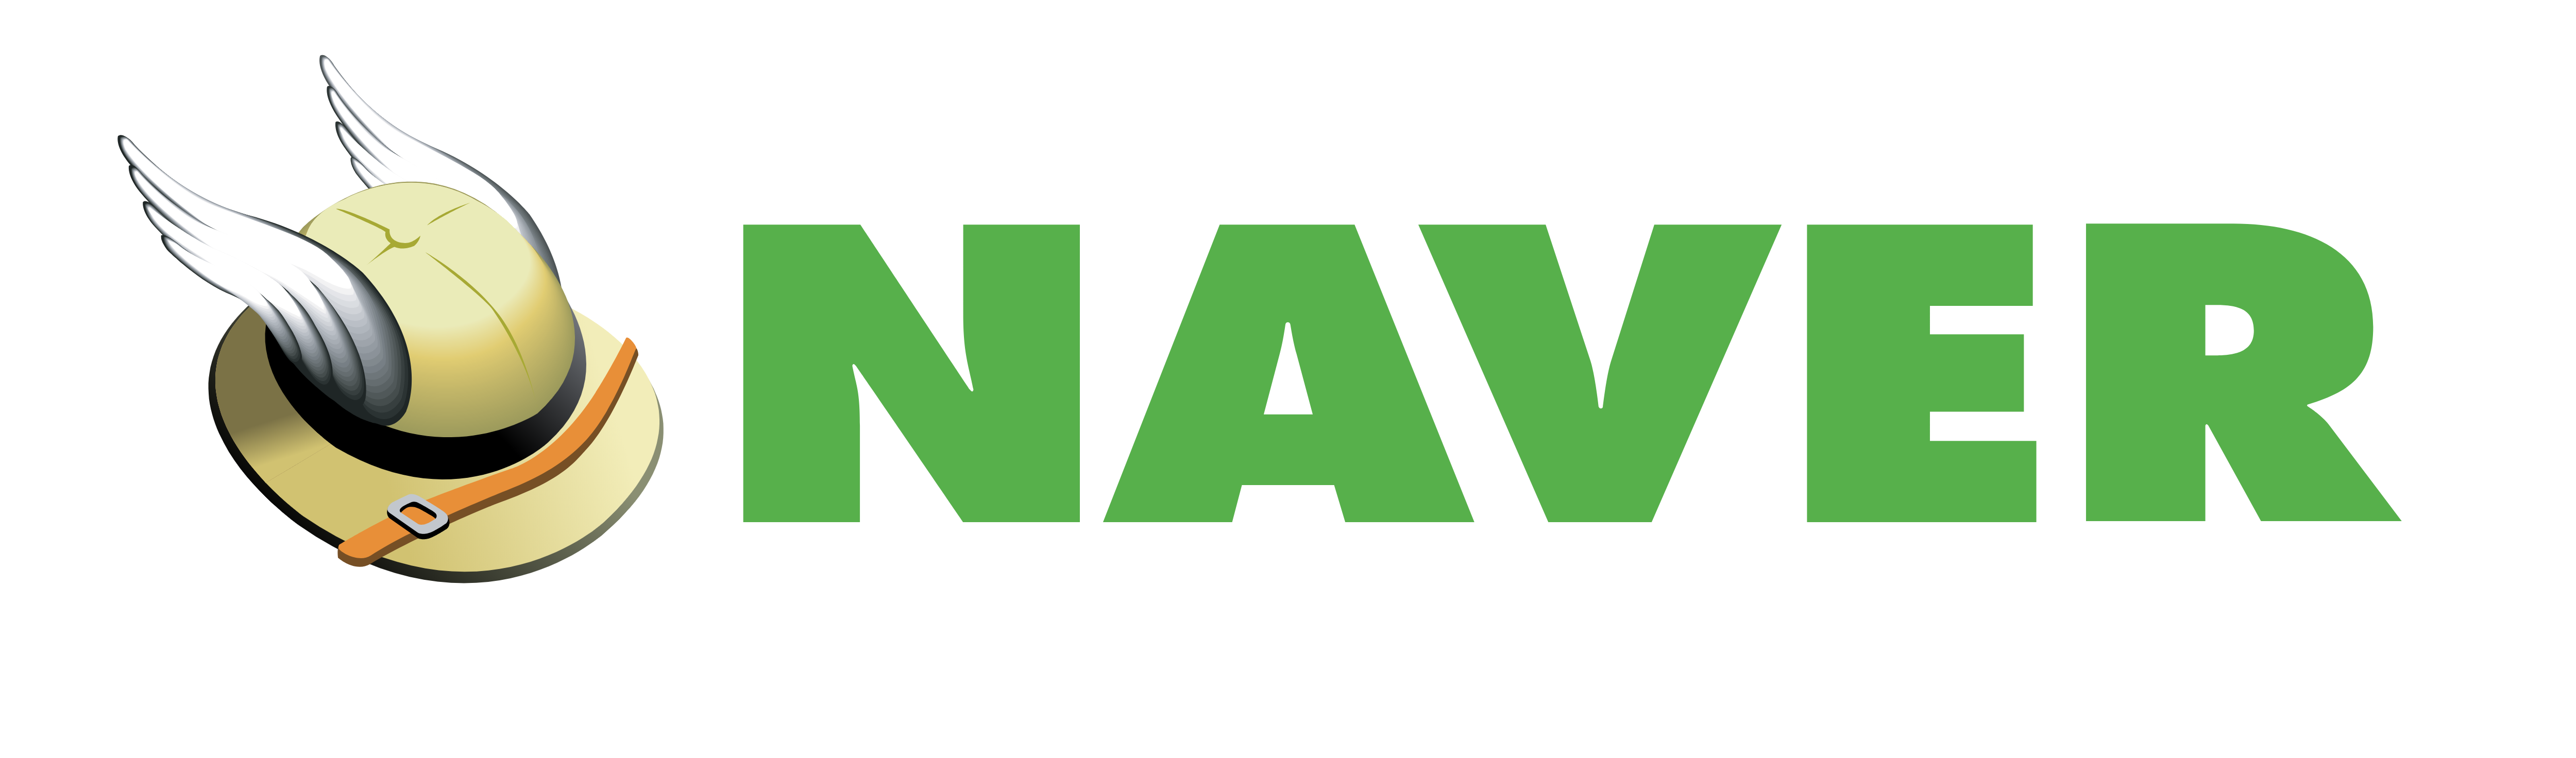 75773200 - waving flag with naver corporation logo. editorial 3d ...